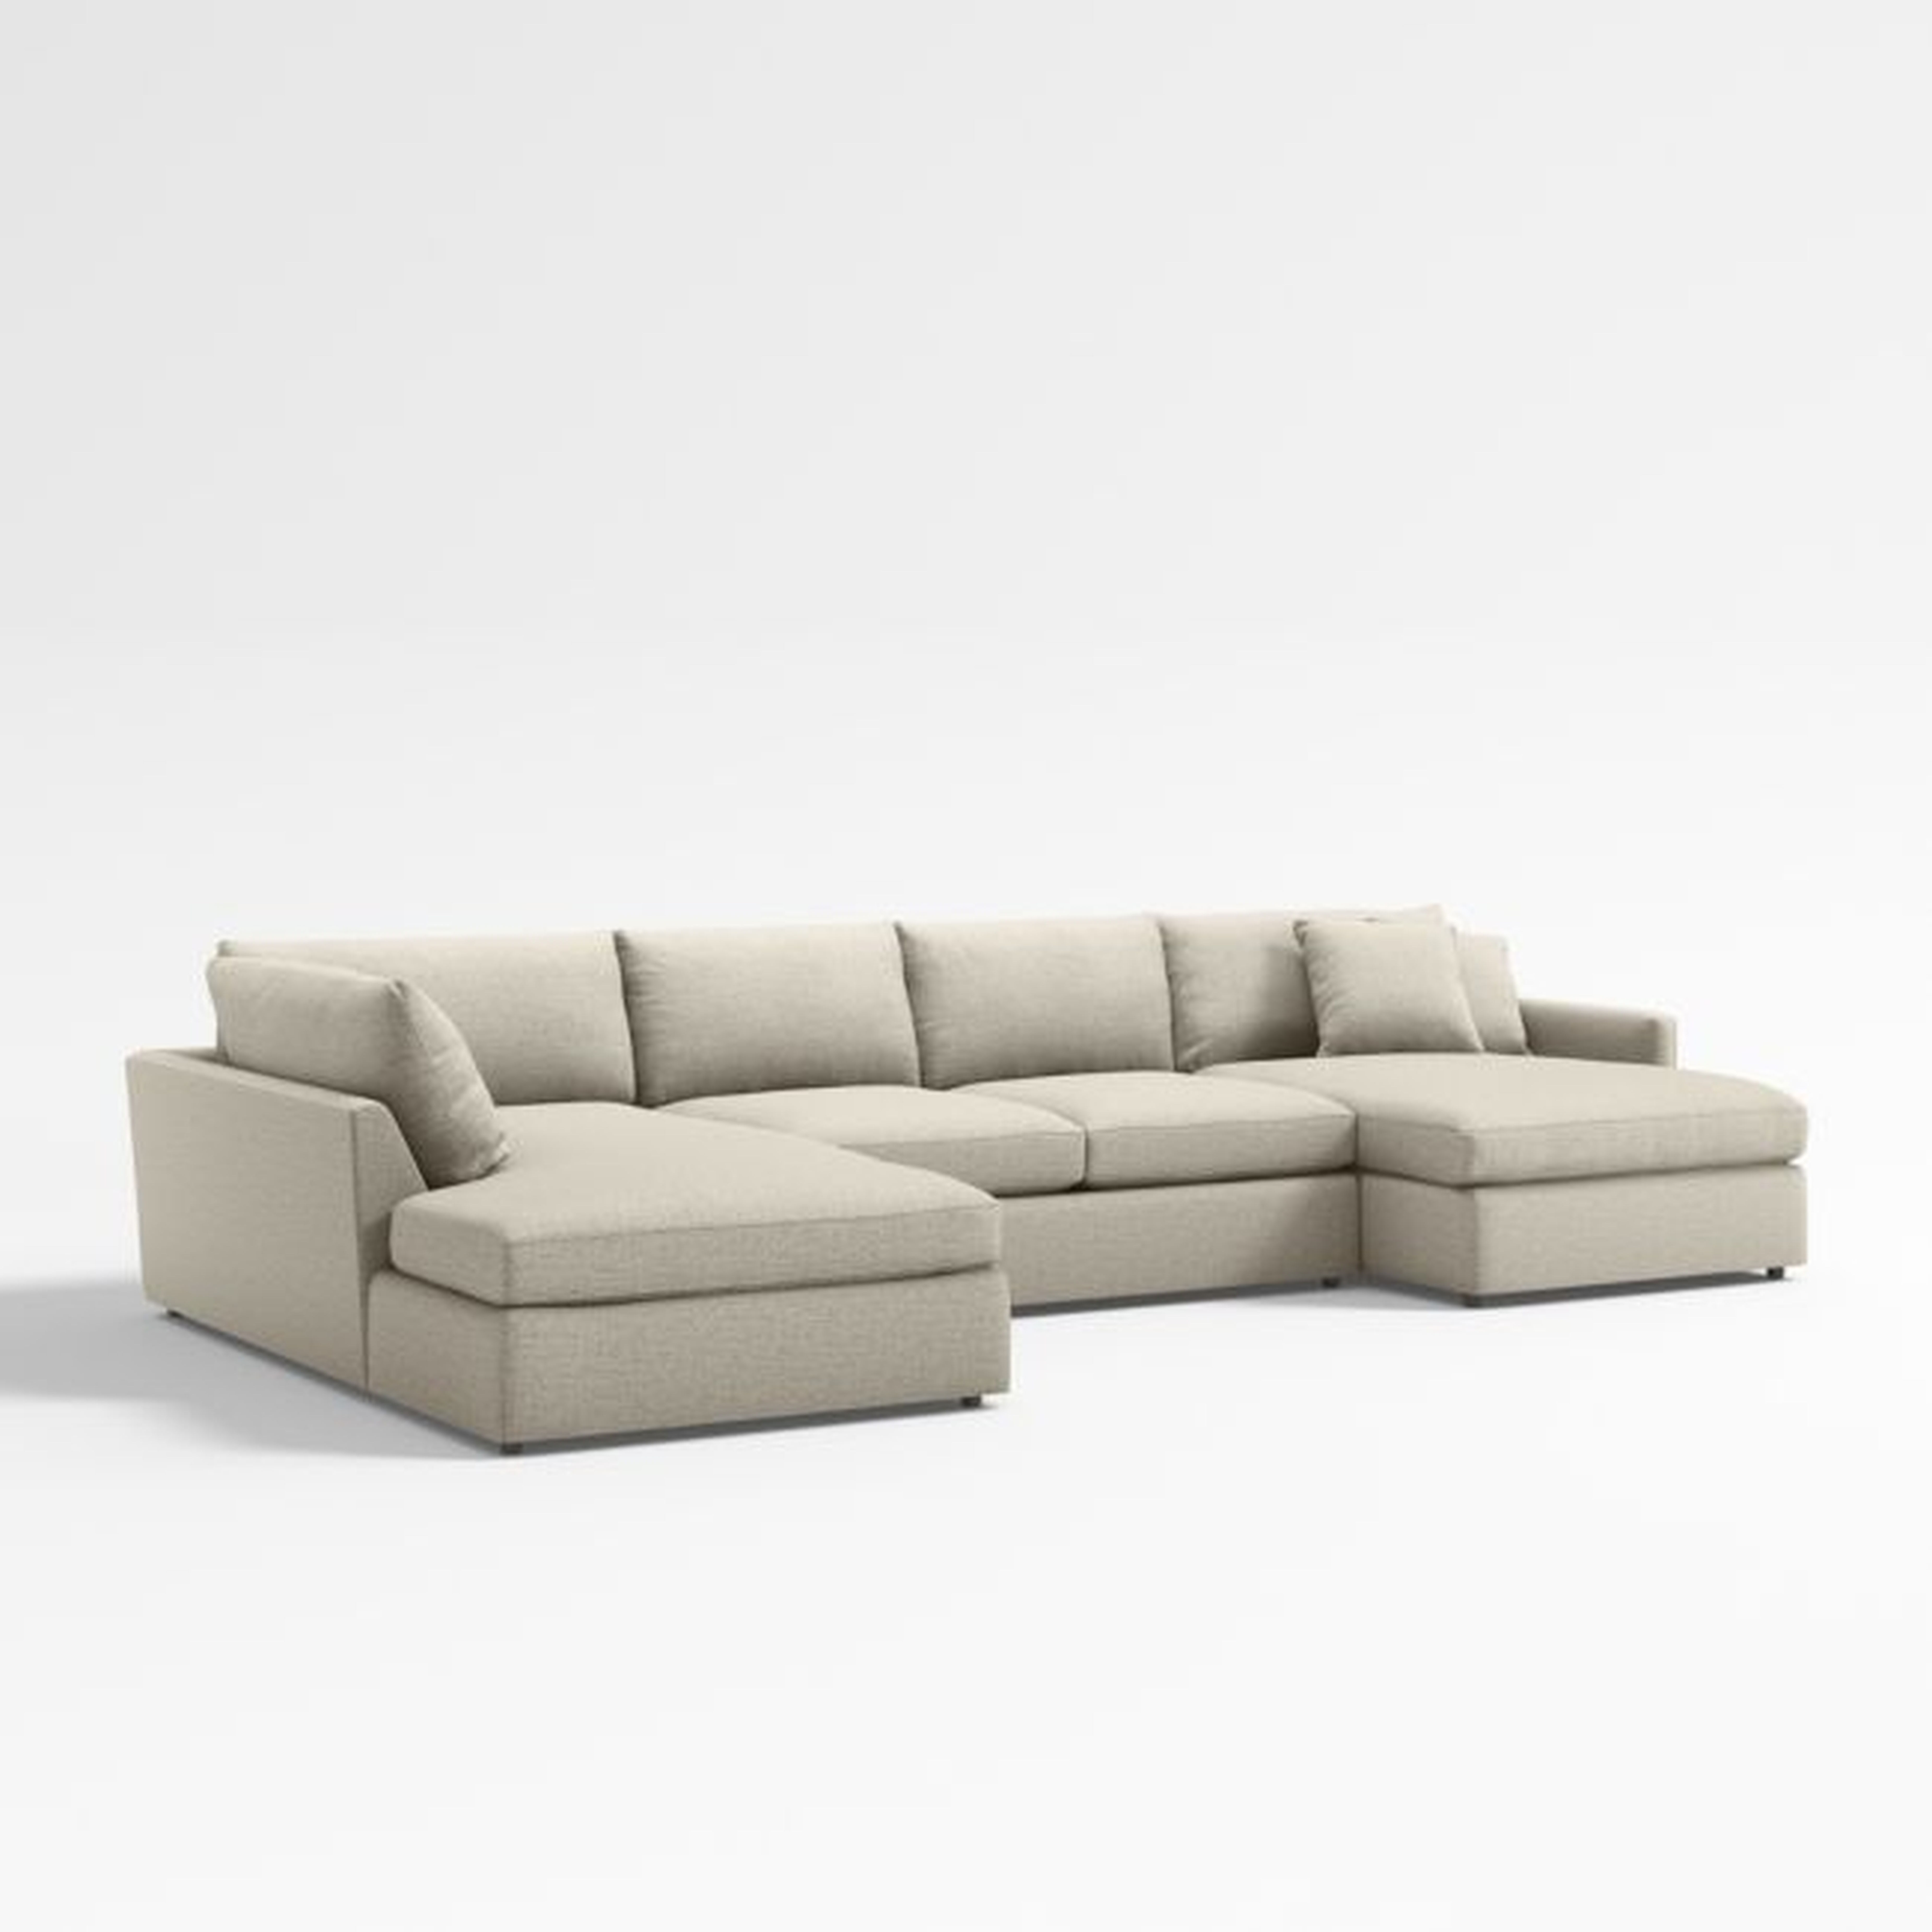 Lounge Deep 3-Piece U-Shaped Sectional Sofa with Left-Arm Corner Bumper - Crate and Barrel